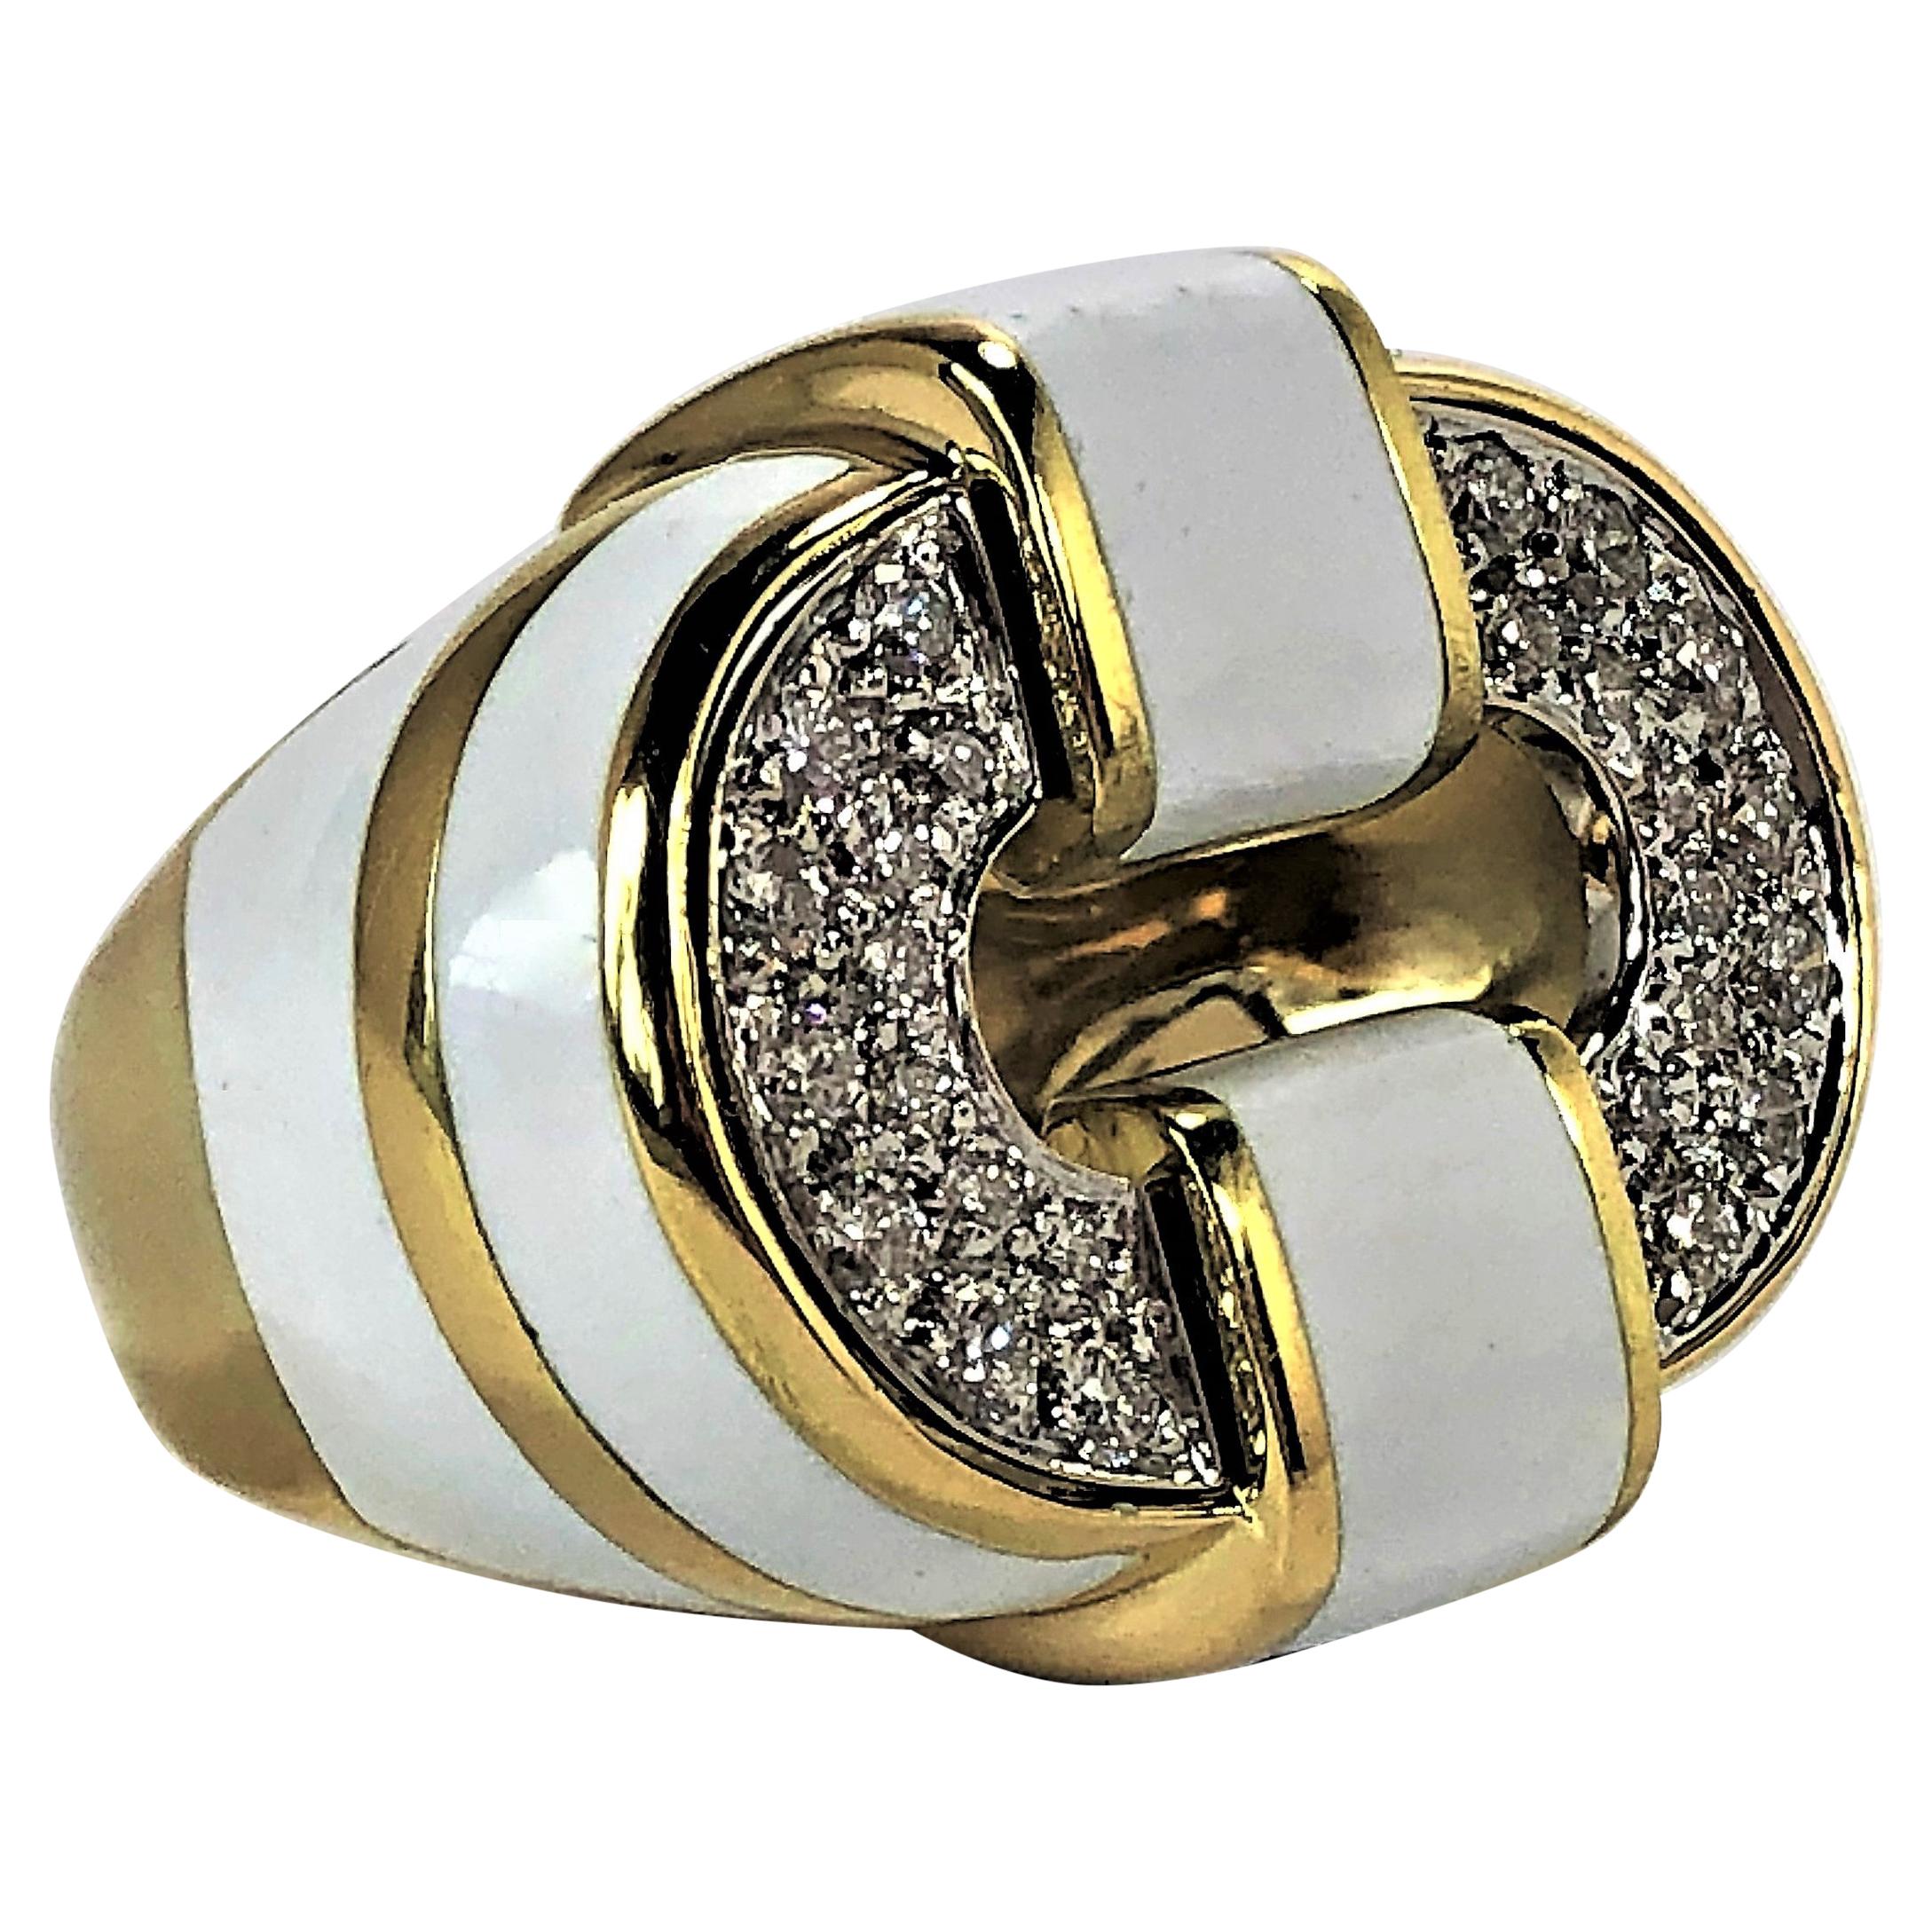 Gold and Diamond Ring with White Enamel